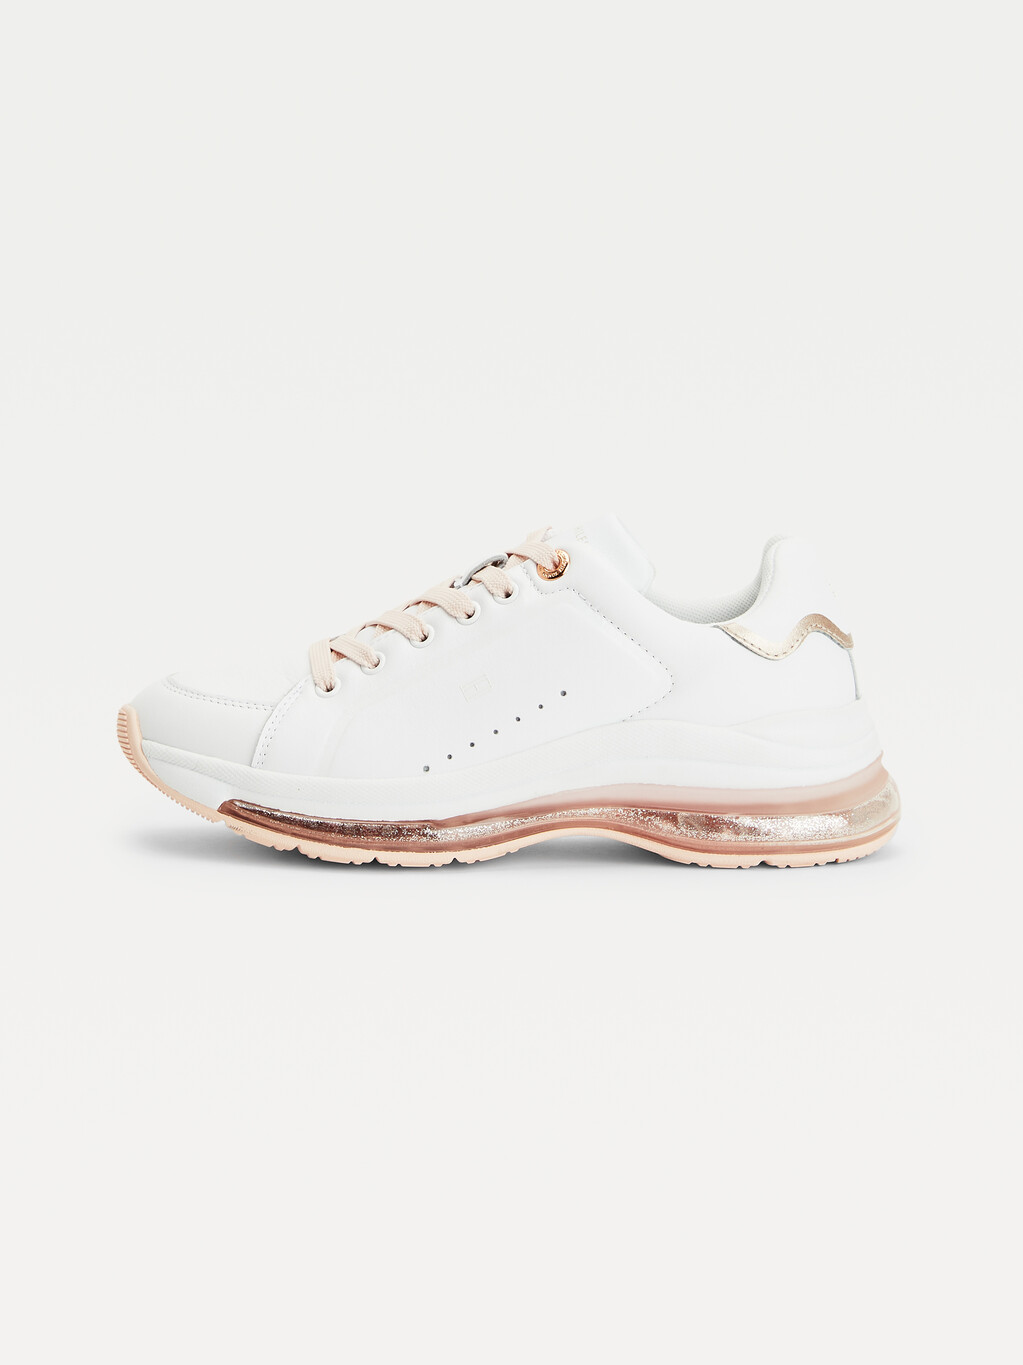 Air Bubble Metallic Leather Trainers